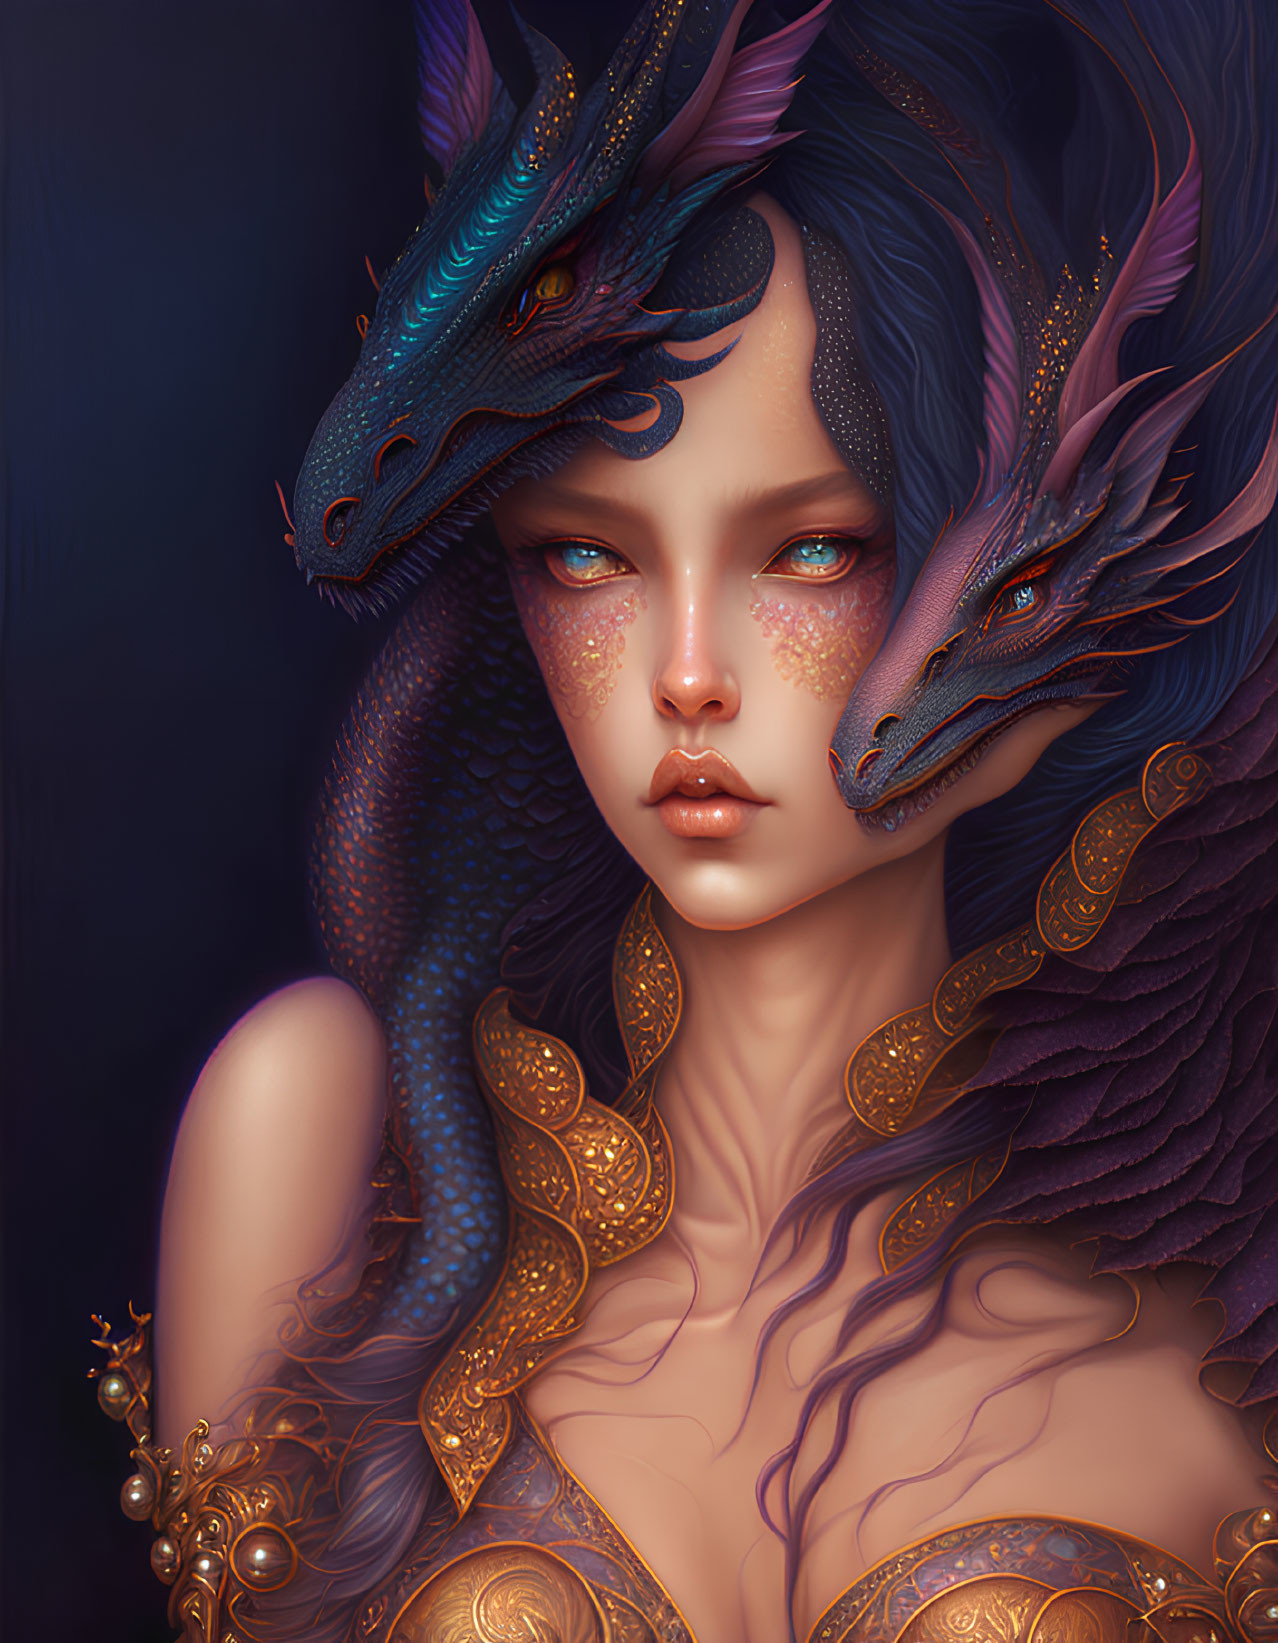 Fantasy illustration: Blue-skinned woman with dragon companions and golden jewelry.